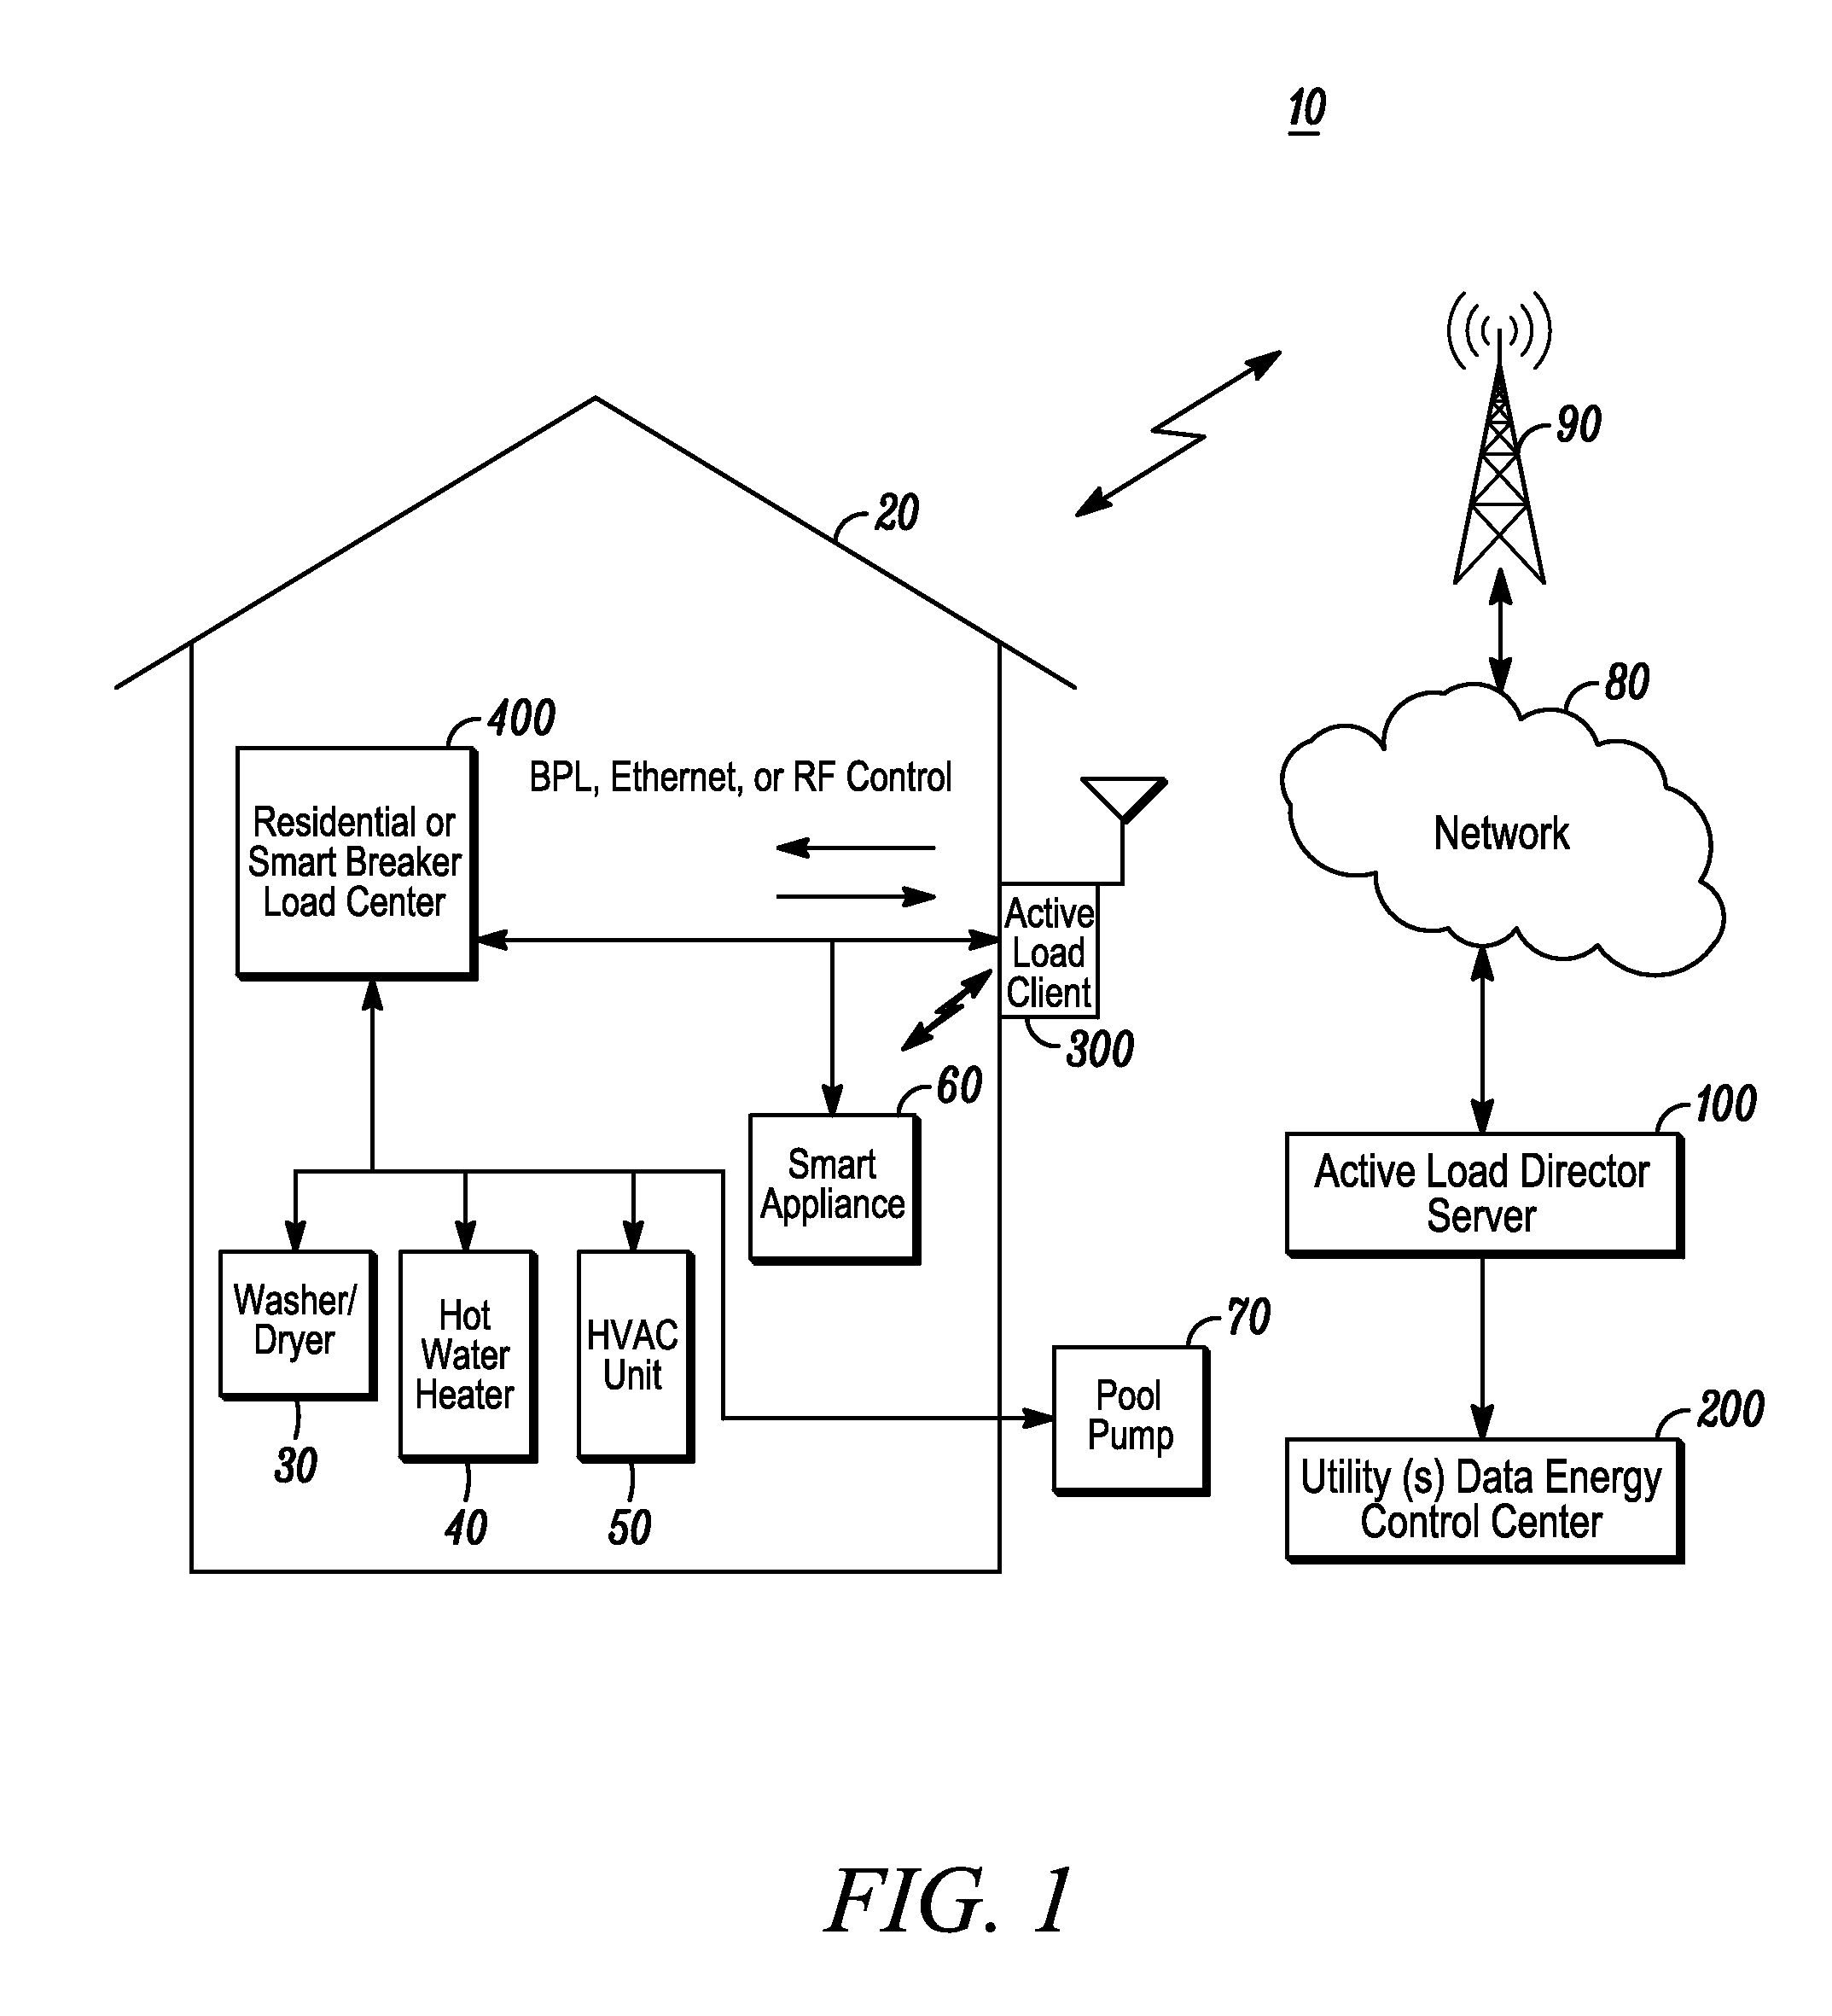 Method and apparatus for actively managing consumption of electric power supplied by an electric utility